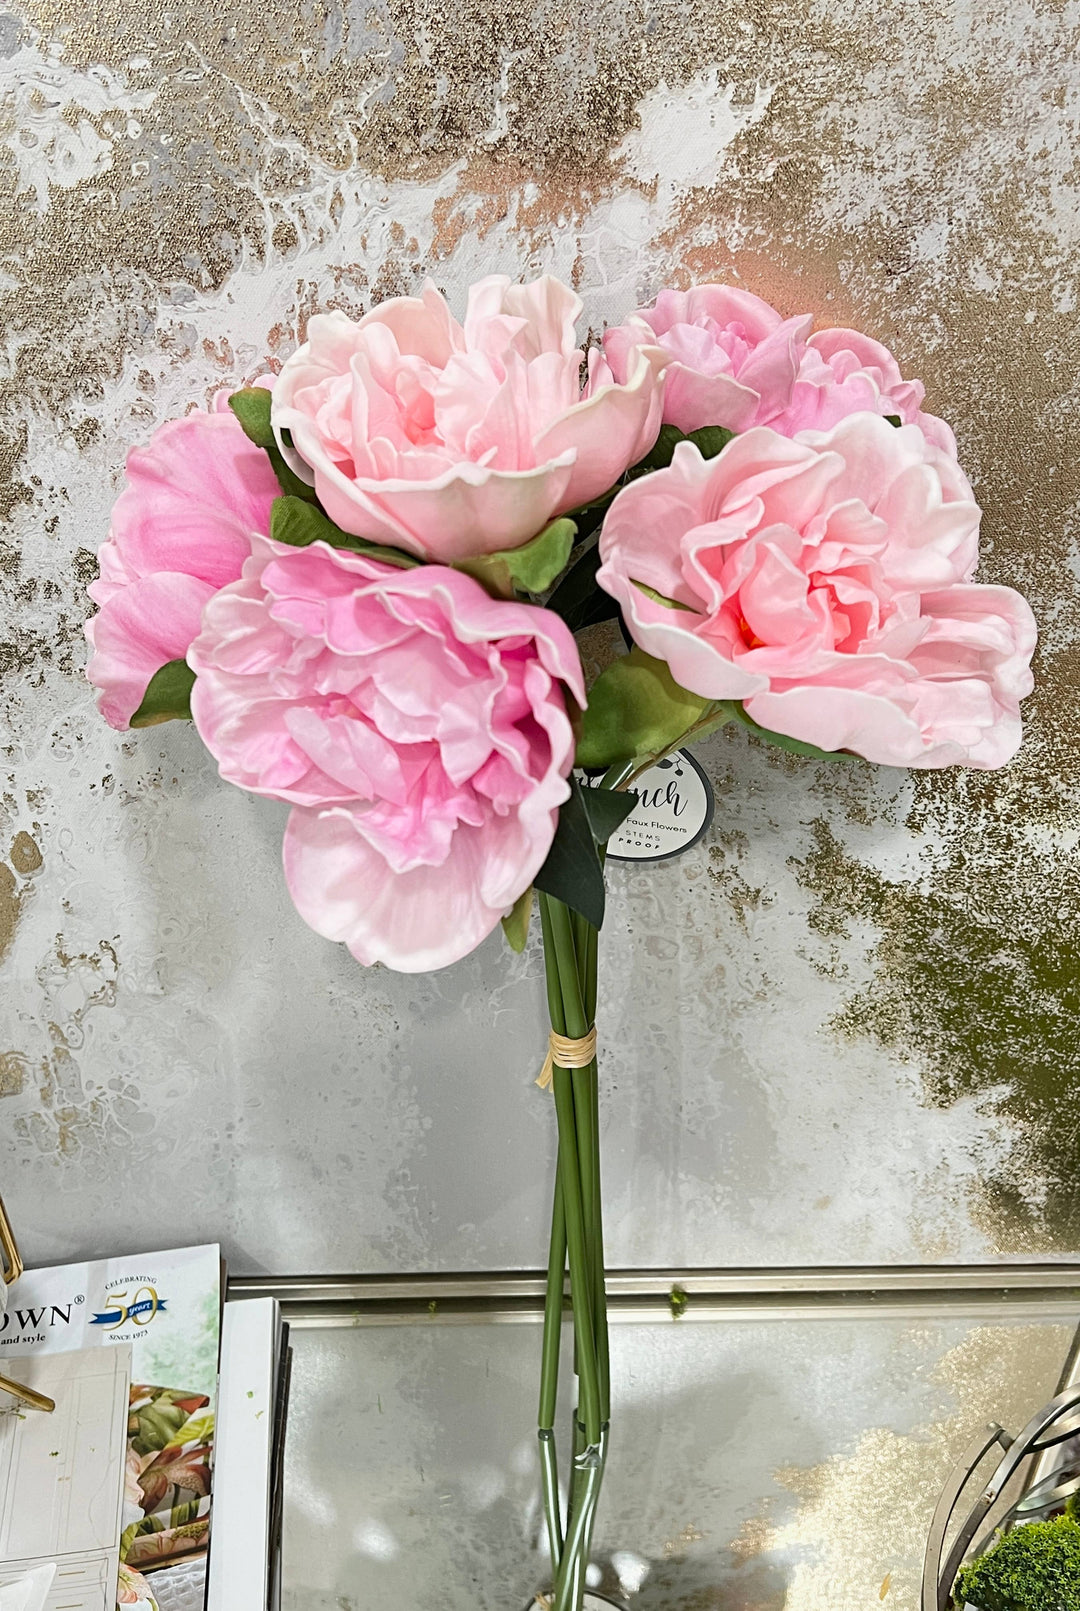 5-stem Bundled-Real Touch Peony Blossom: Shades of Soft Pink- 16" - Pine & Moss